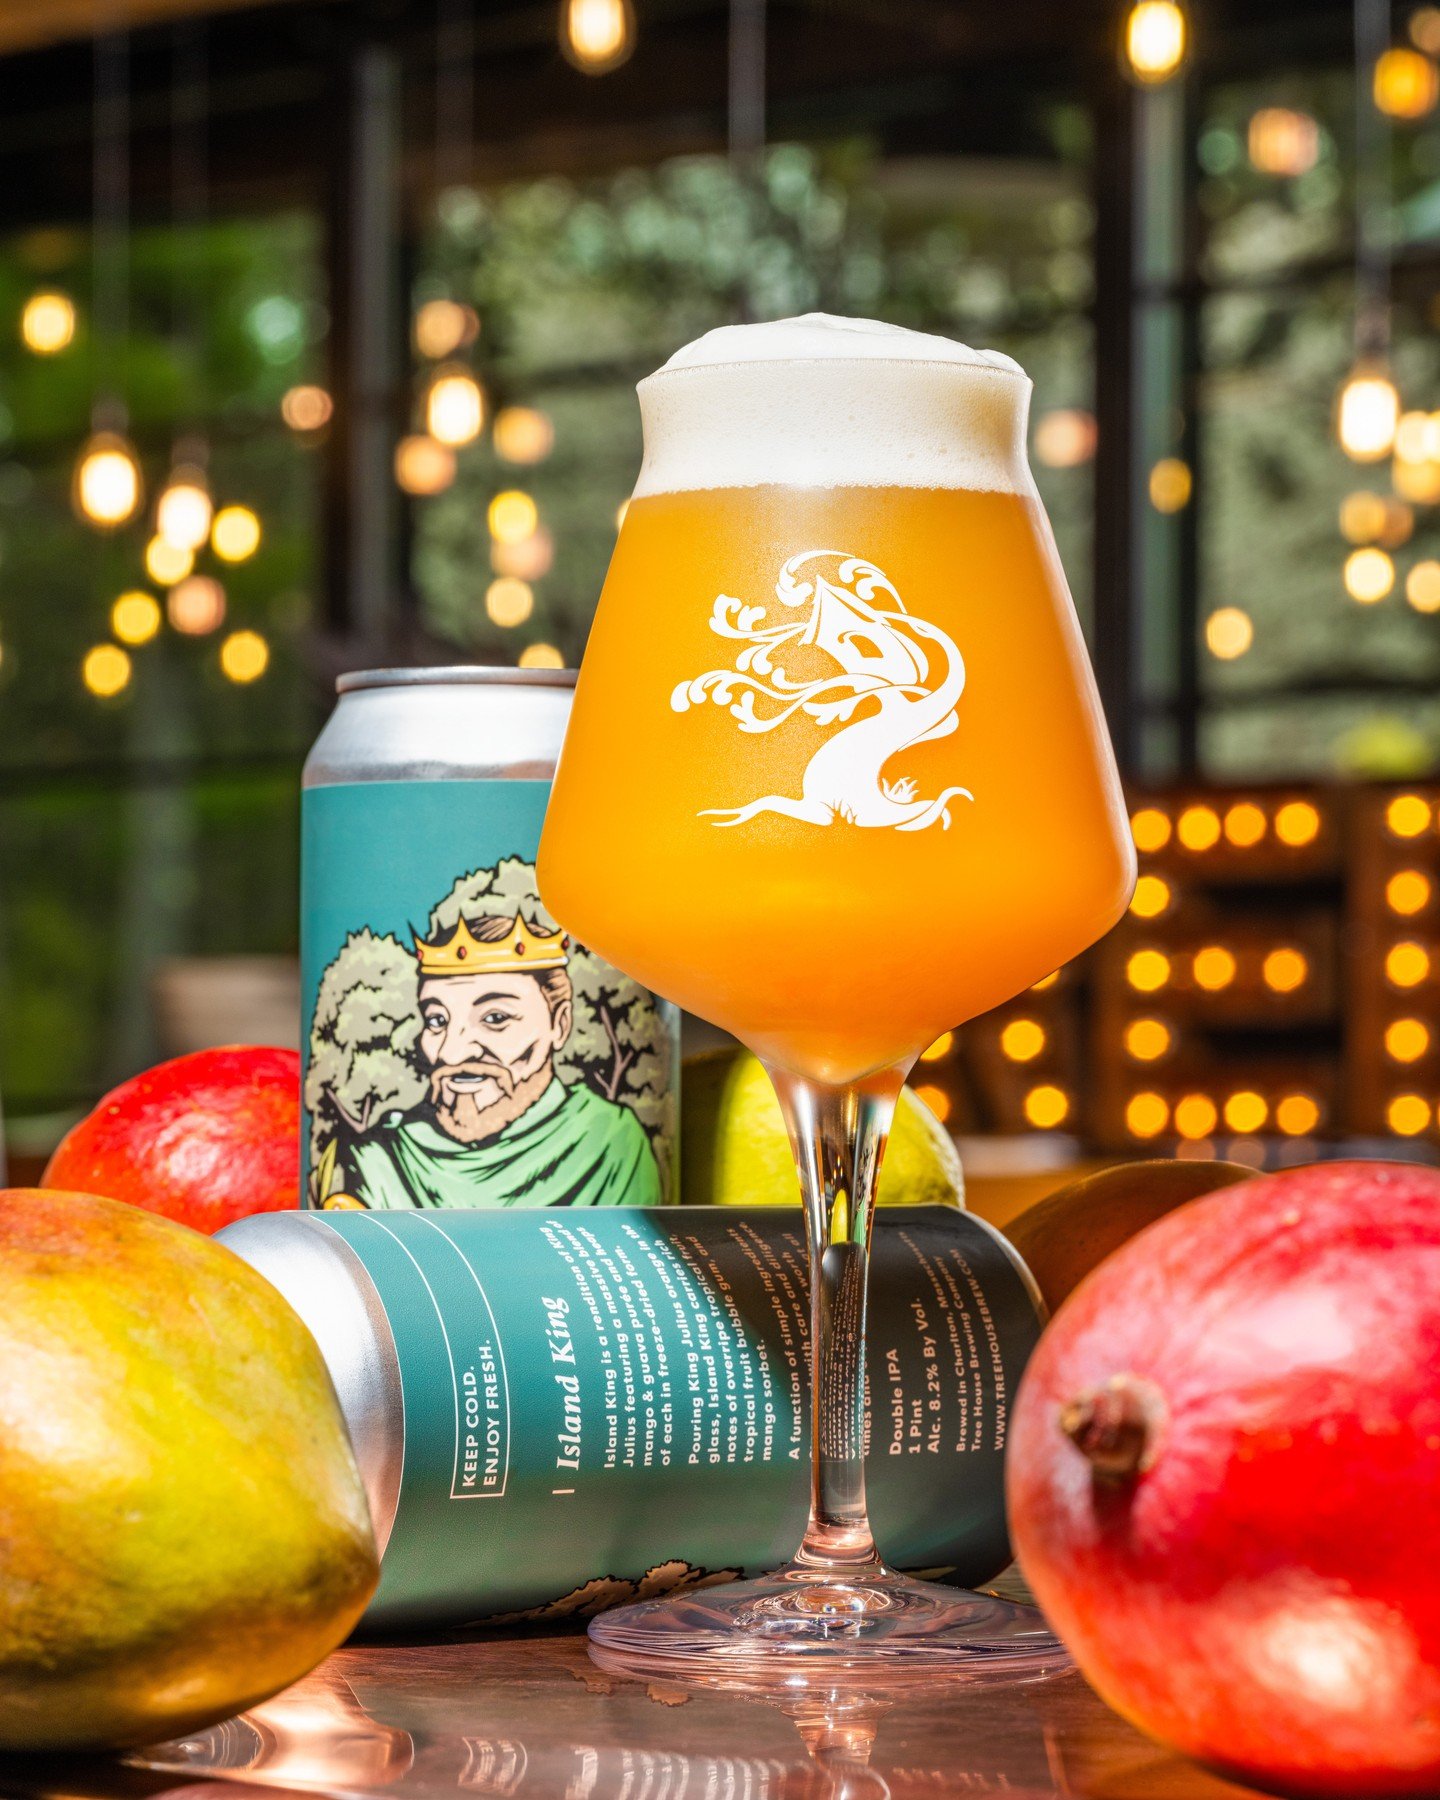 Mango + Guava + the King is designed to transport your senses to a more tropical place.

Island King has returned!

#productphotography #productphotodaily #photography #craftbeer #treehousebrewing #beergram #beerstagram #beersandcameras #beerlover #b